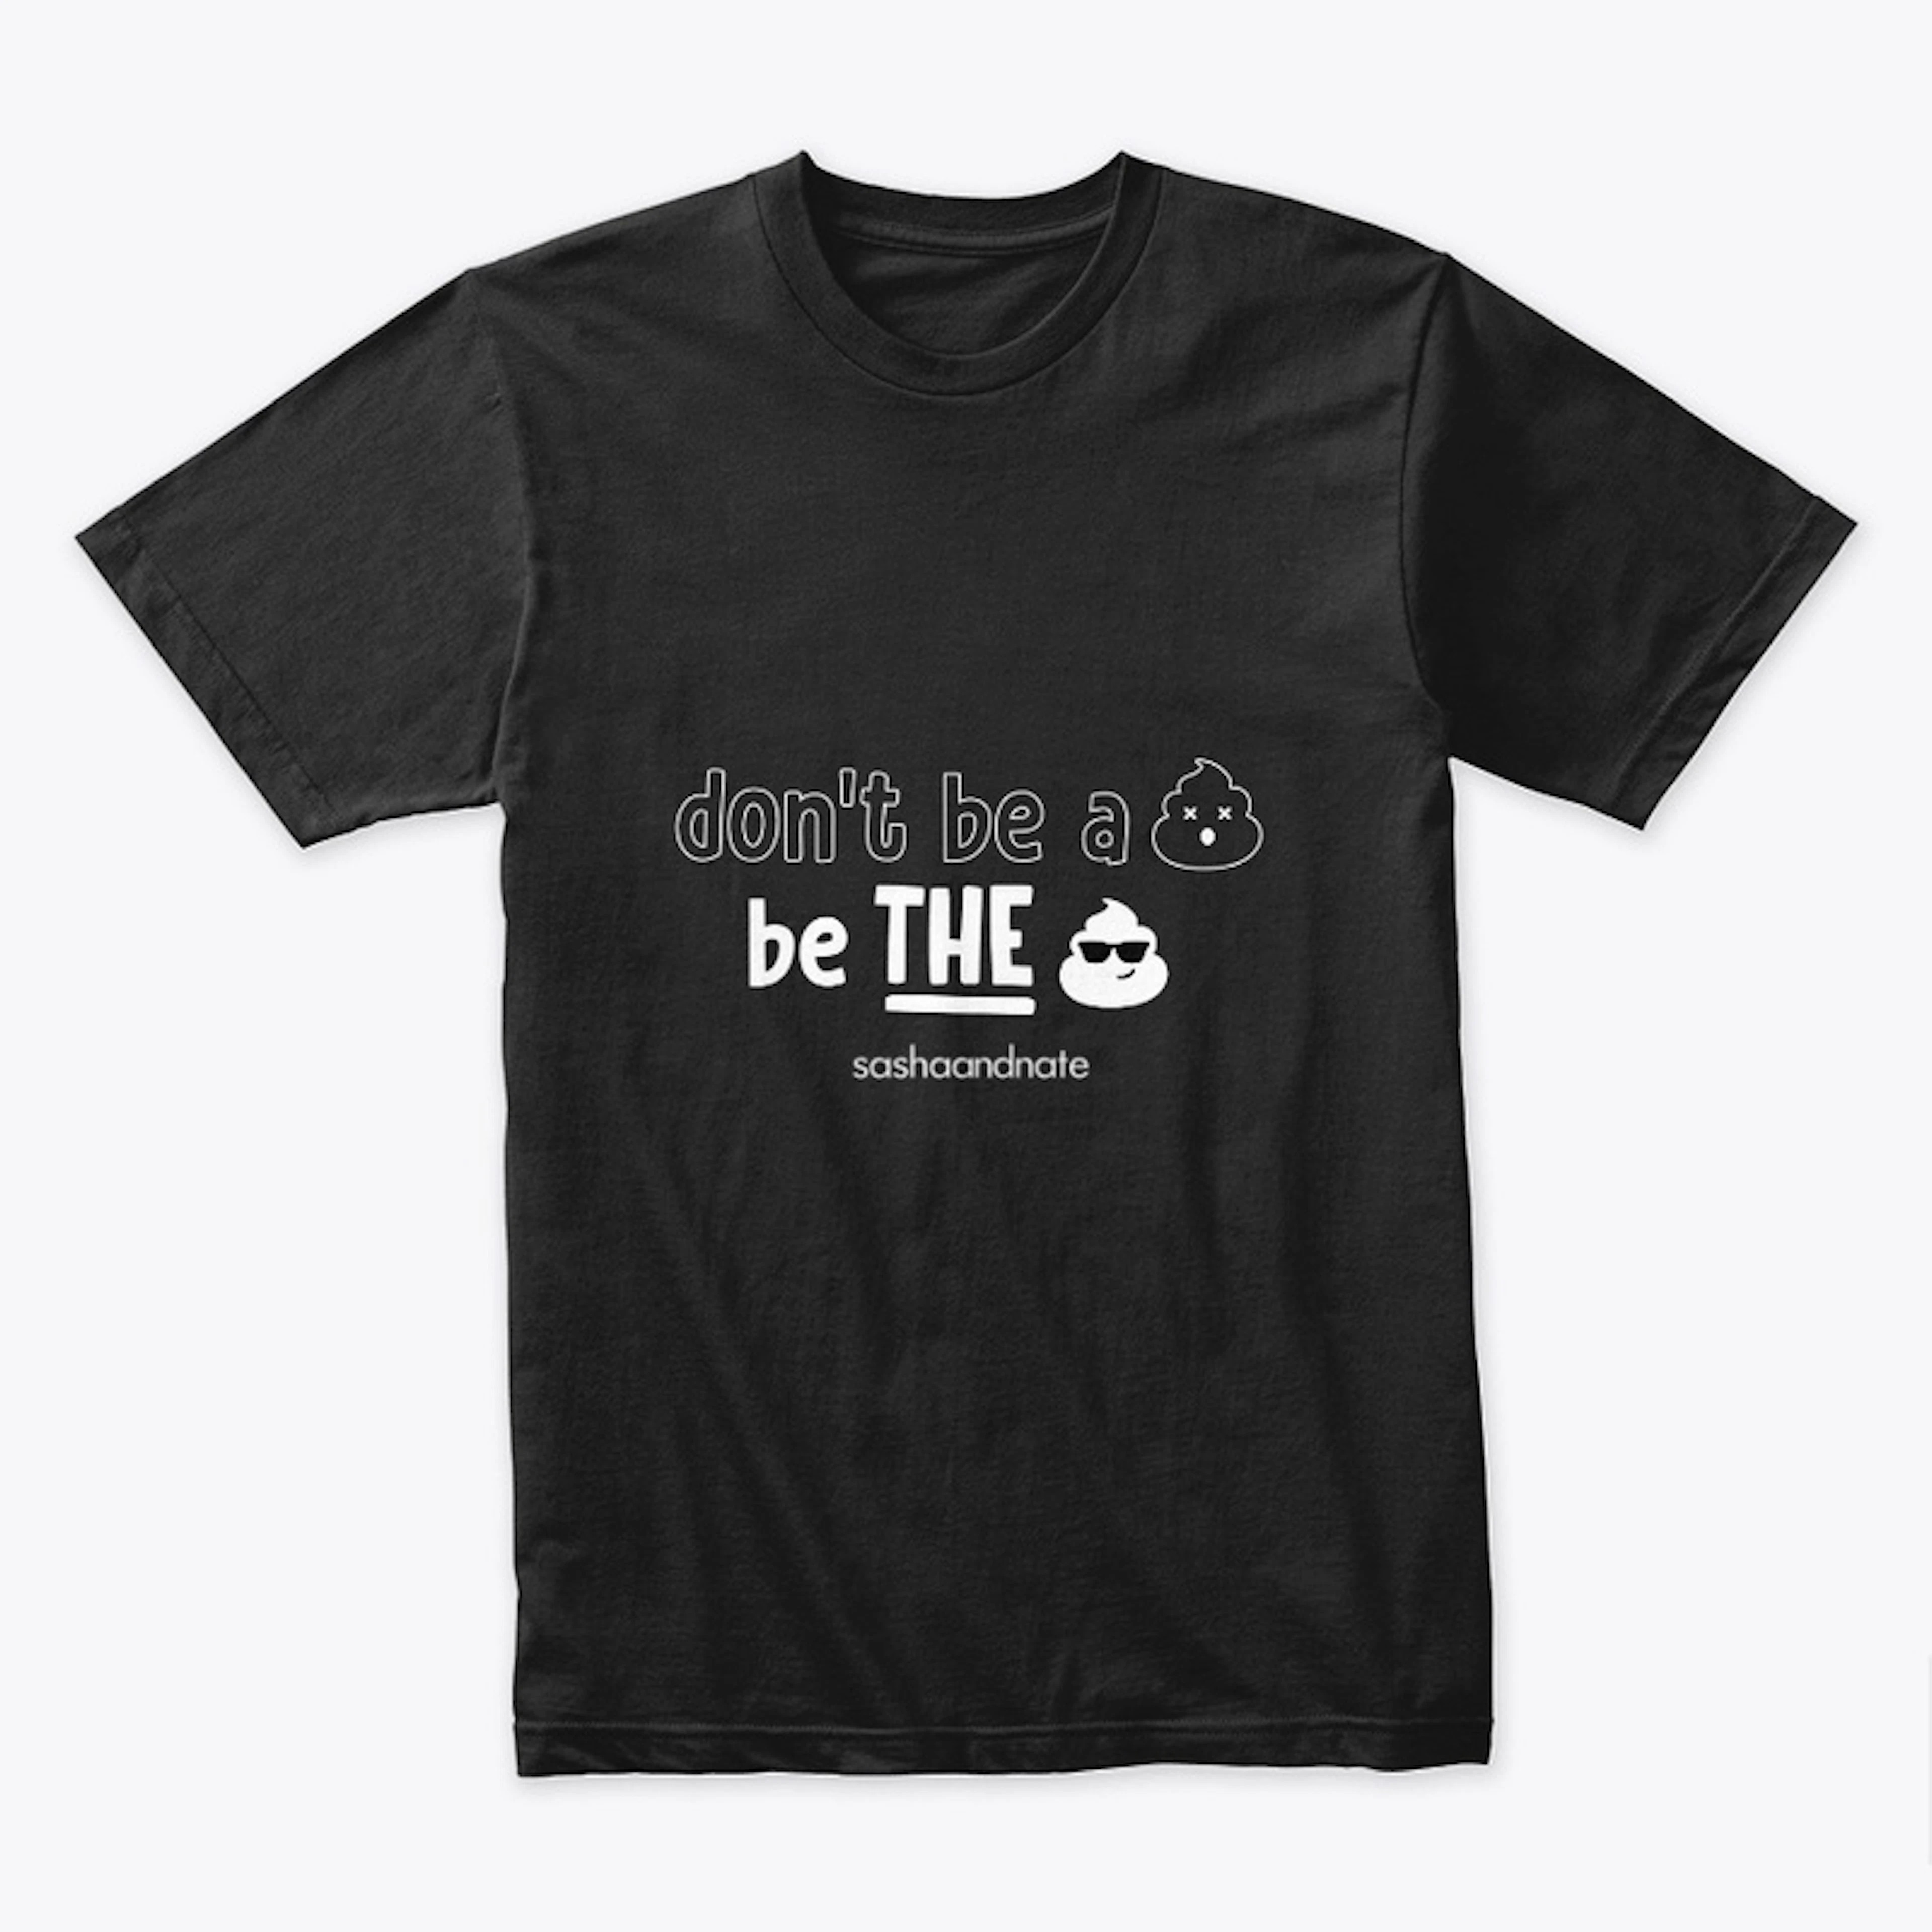 Don't be a... T-shirt #natesaid